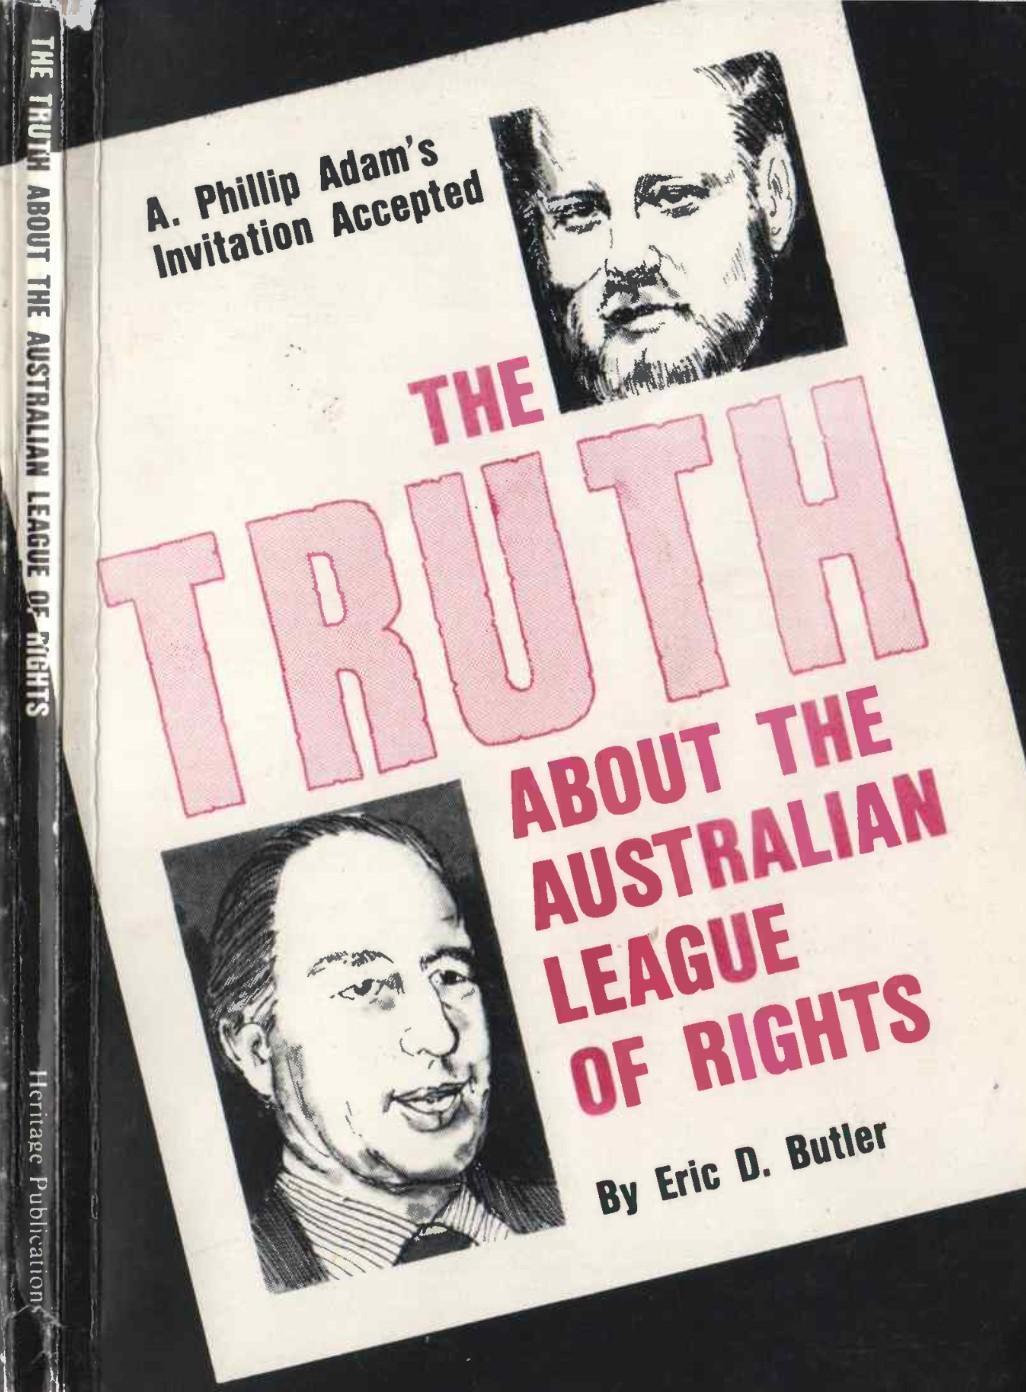 The Truth About The Australian League Of Rights (1985) by Eric D. Butler